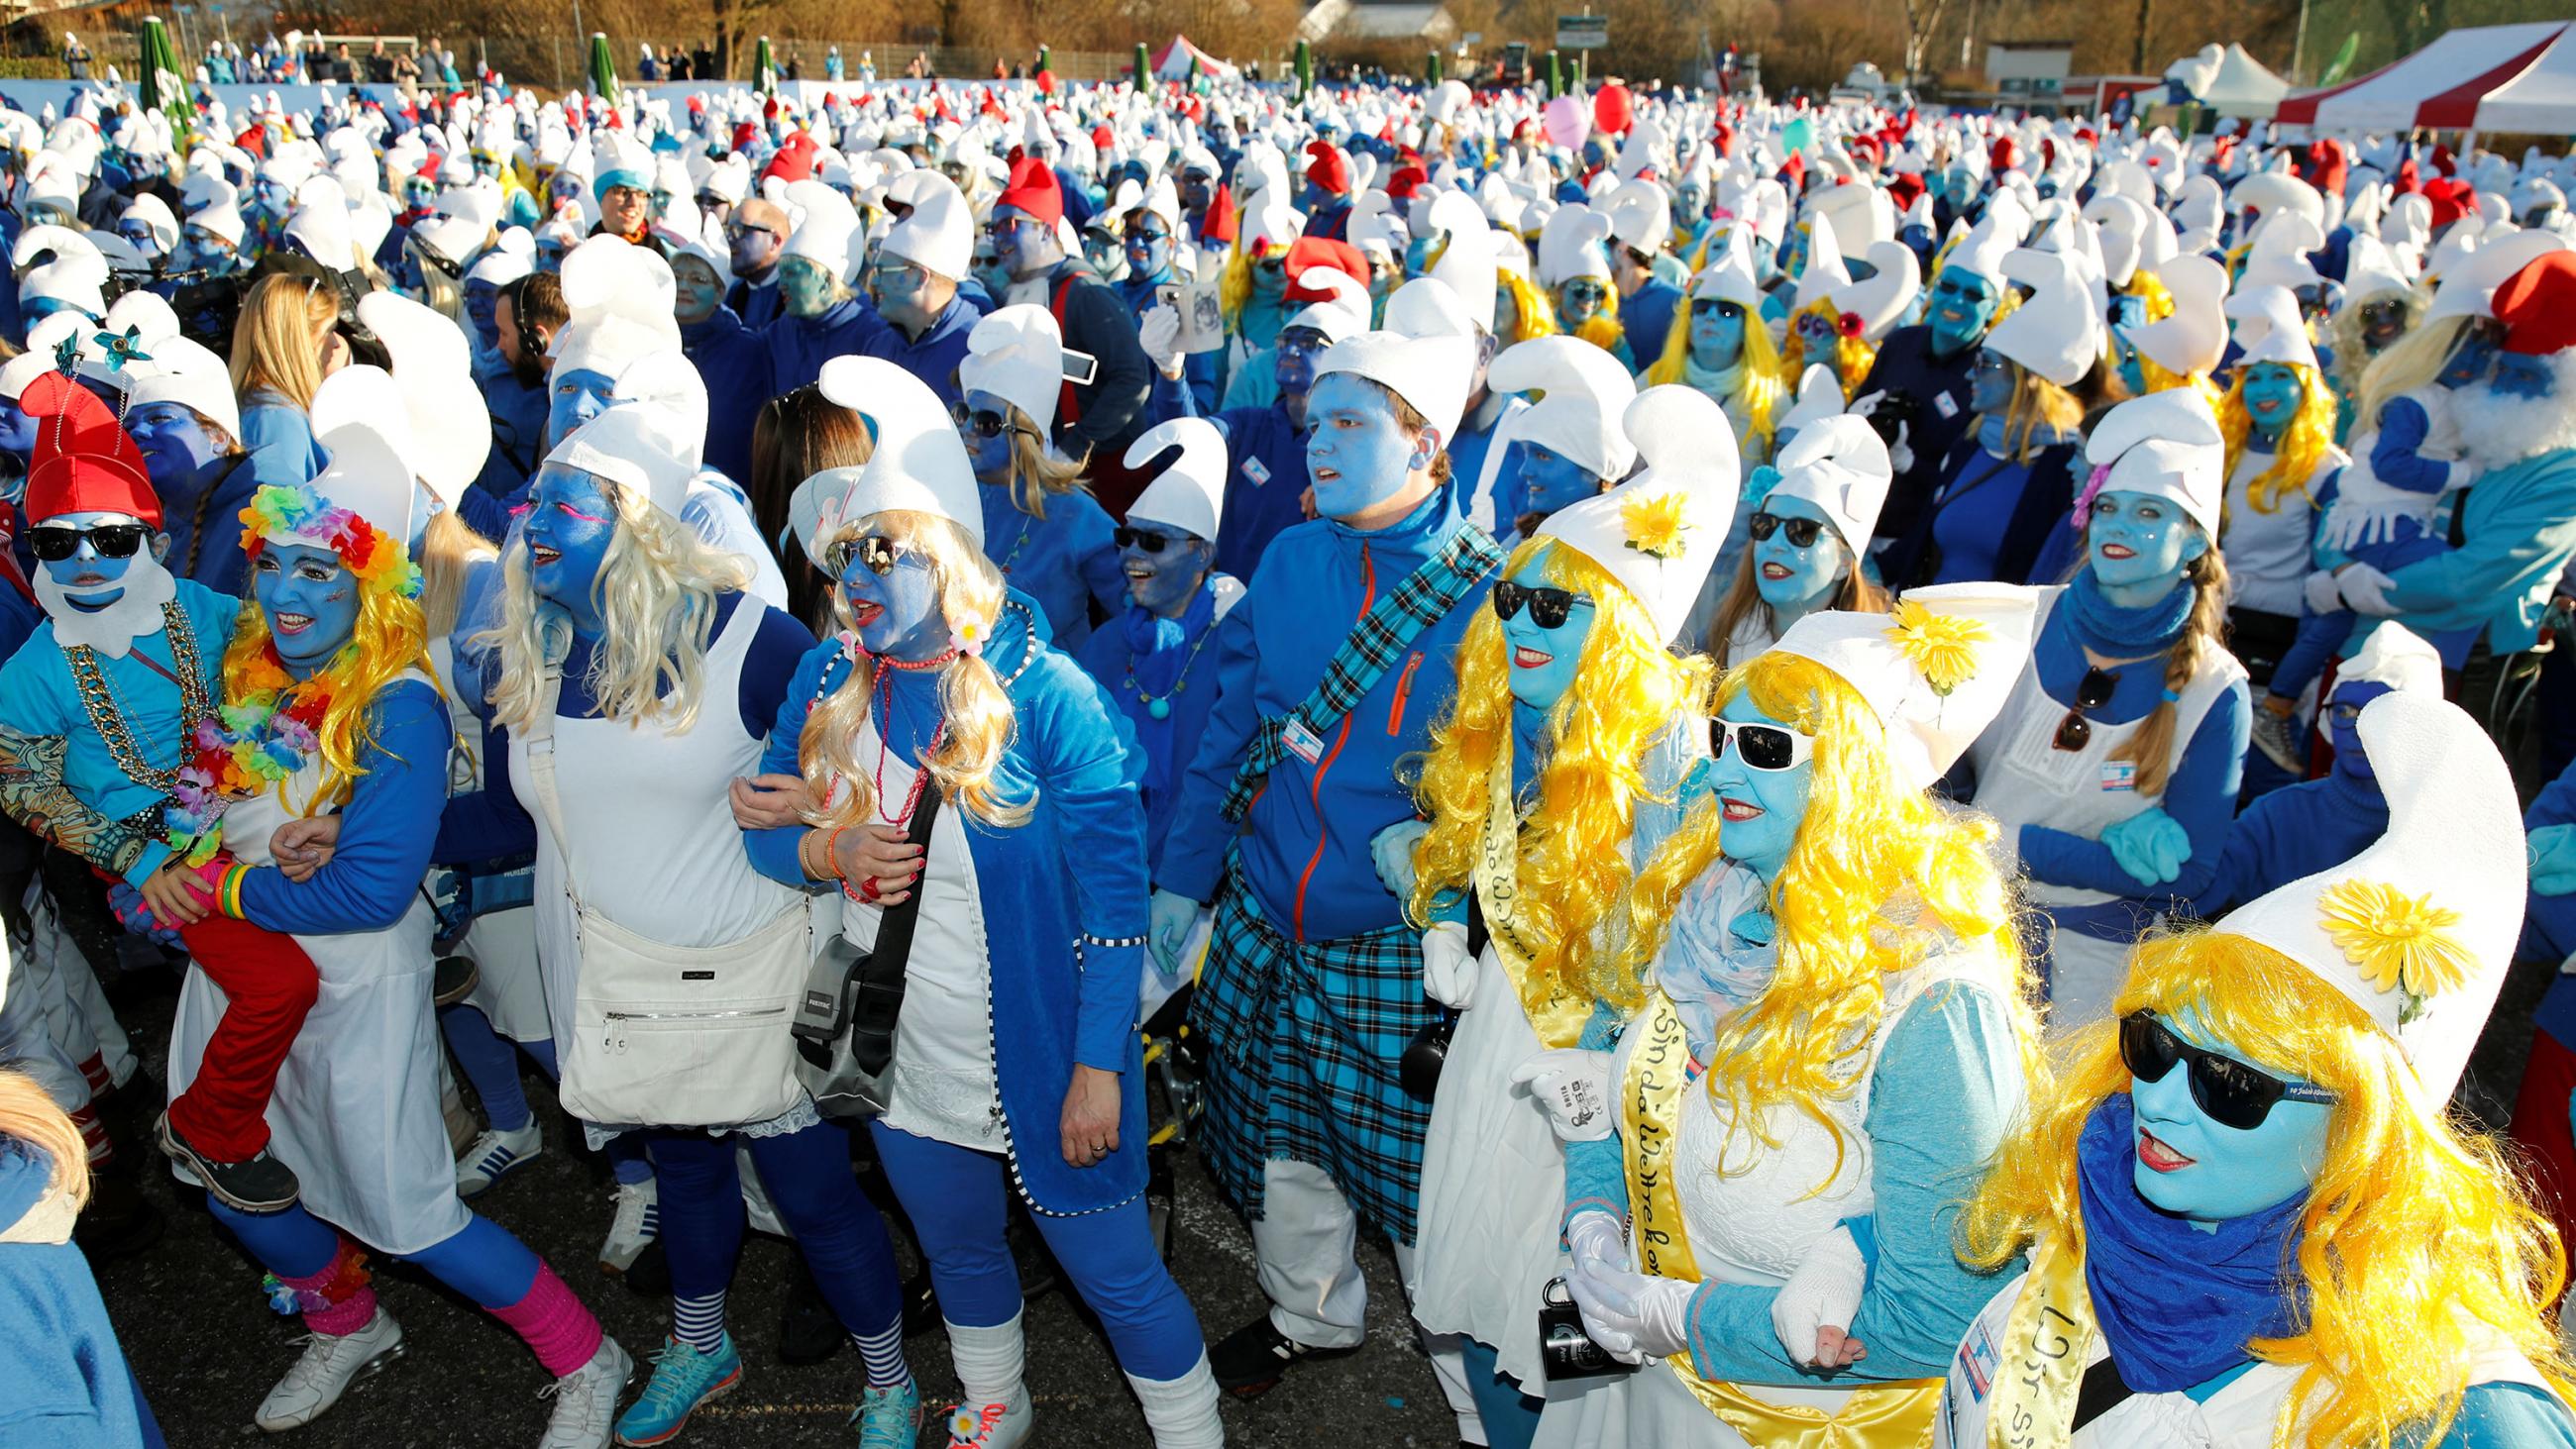 This photo shows the previous attempt in Germany on February 16, 2019. The picture shows a huge crowd of people dressed in blue face as the cartoon character. 